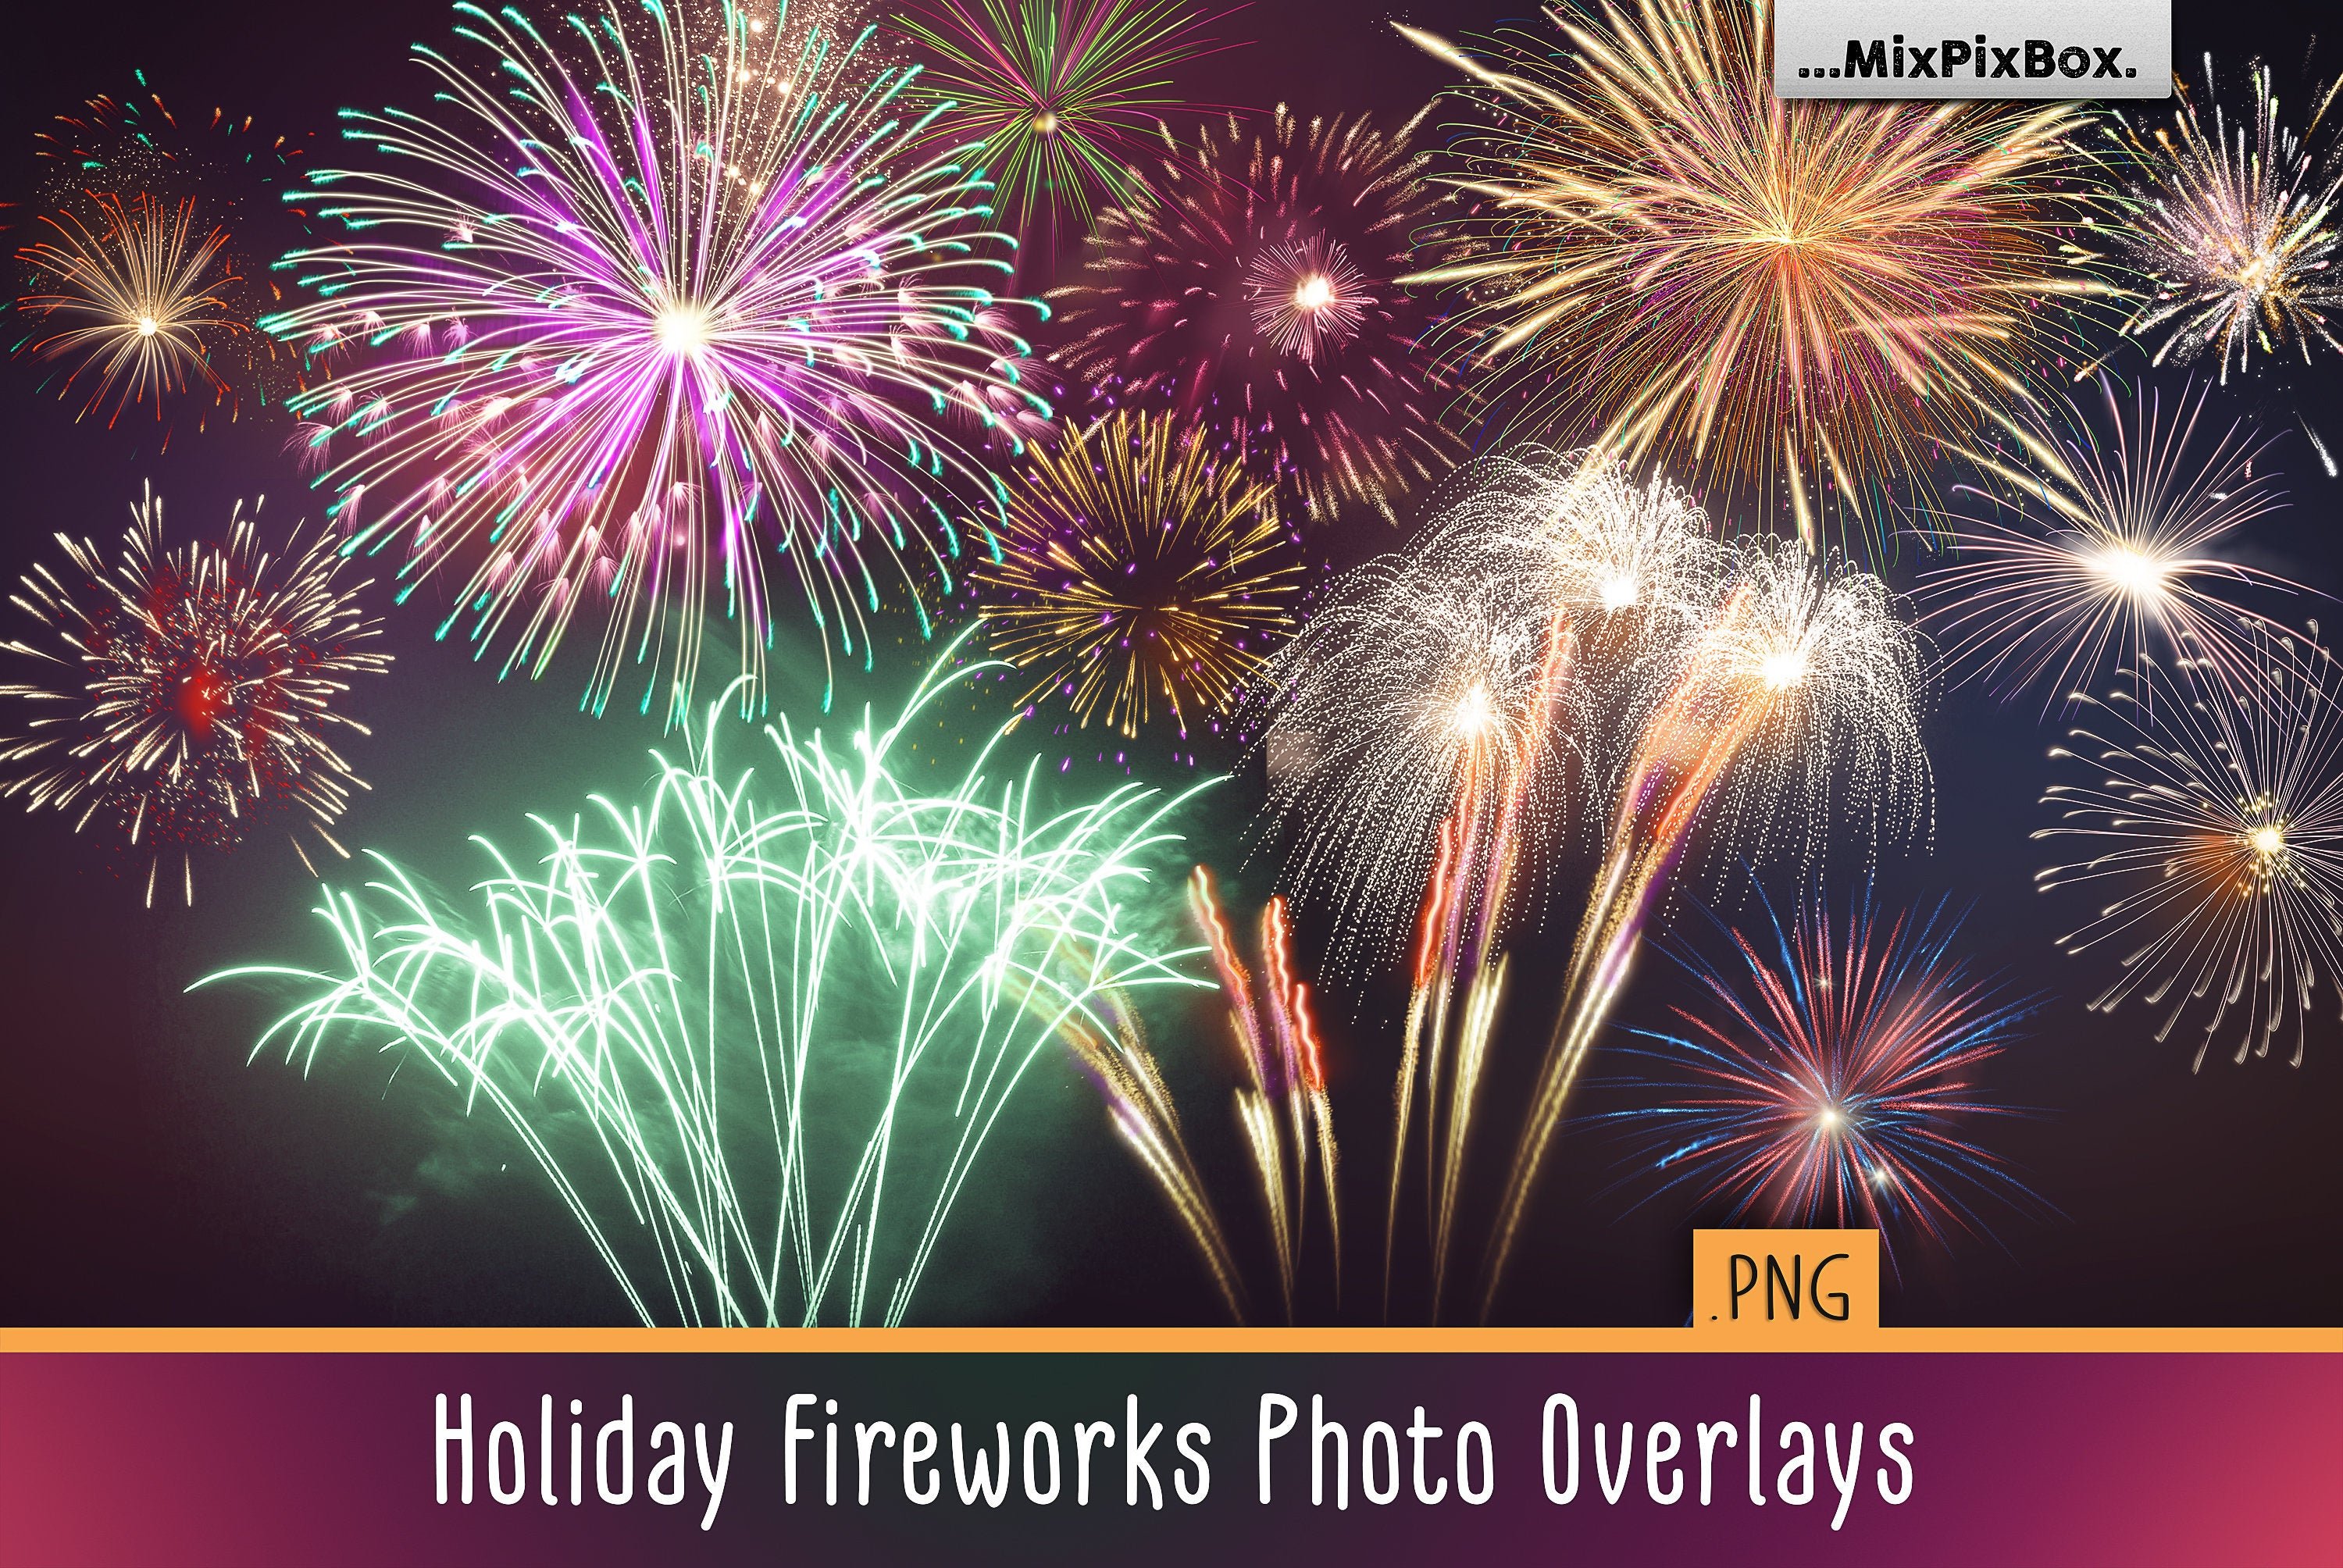 Holiday Fireworks Photo Overlayscover image.